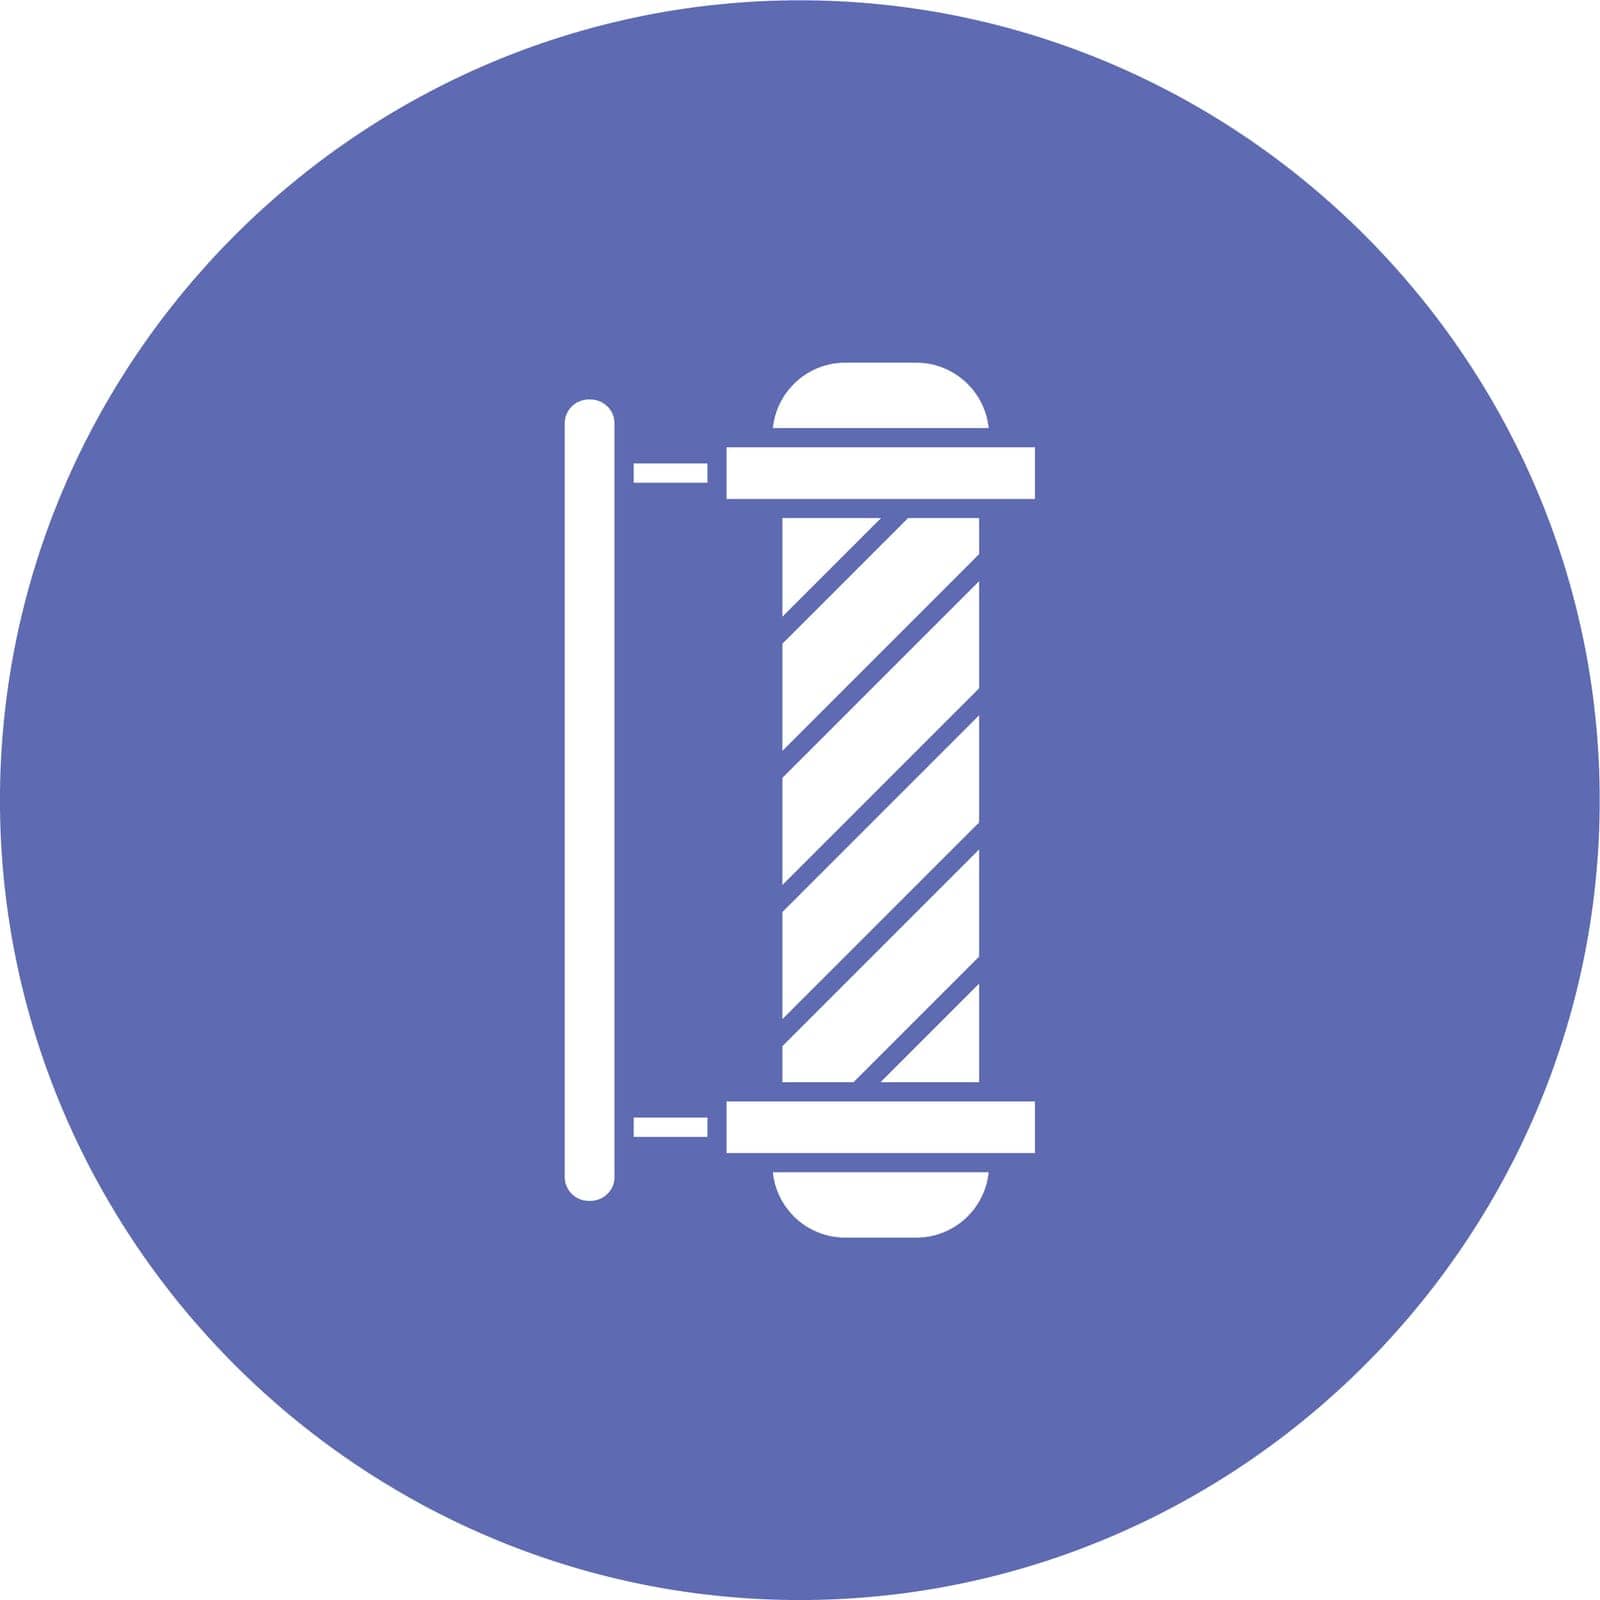 Barber Pole icon vector image. Suitable for mobile application web application and print media.